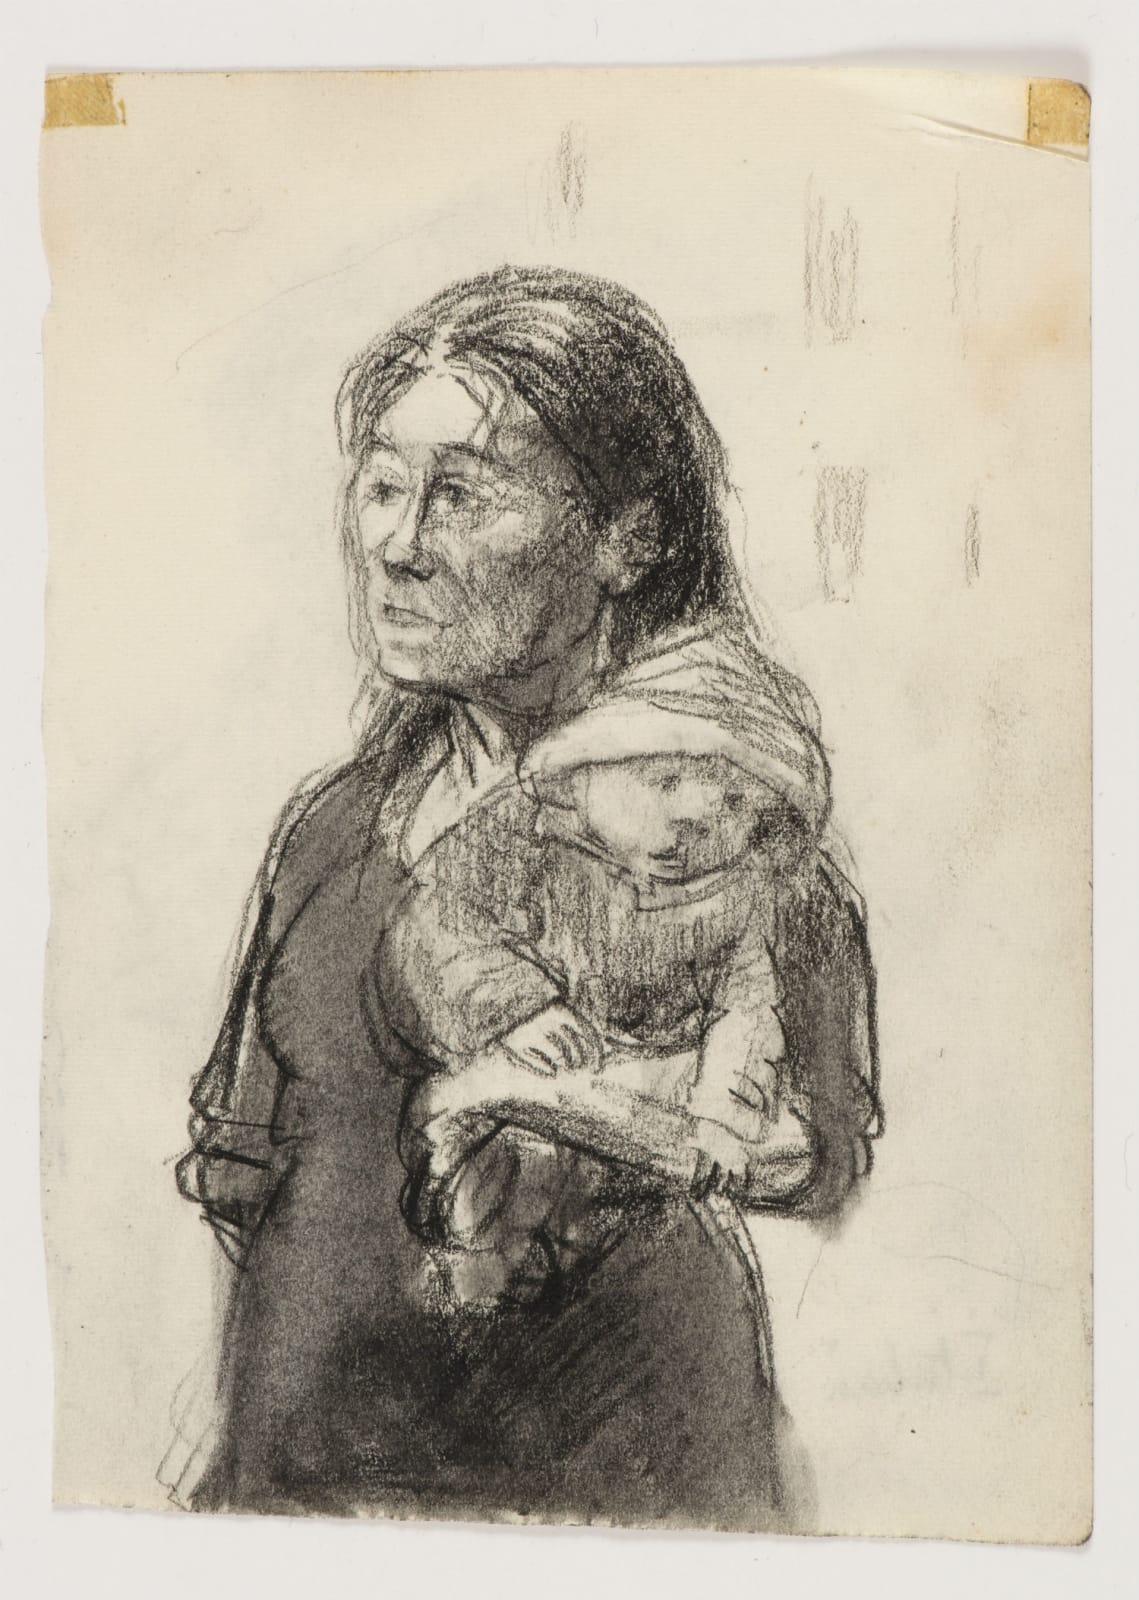 Eva Frankfurther (1930-1959) Italian Woman Stepney (Series of 8 Sketches from 'Whitechapel Diary') 1957 Pencil on paper 14.1 x 10 cm Private Collection To see and discover more about this artist click here